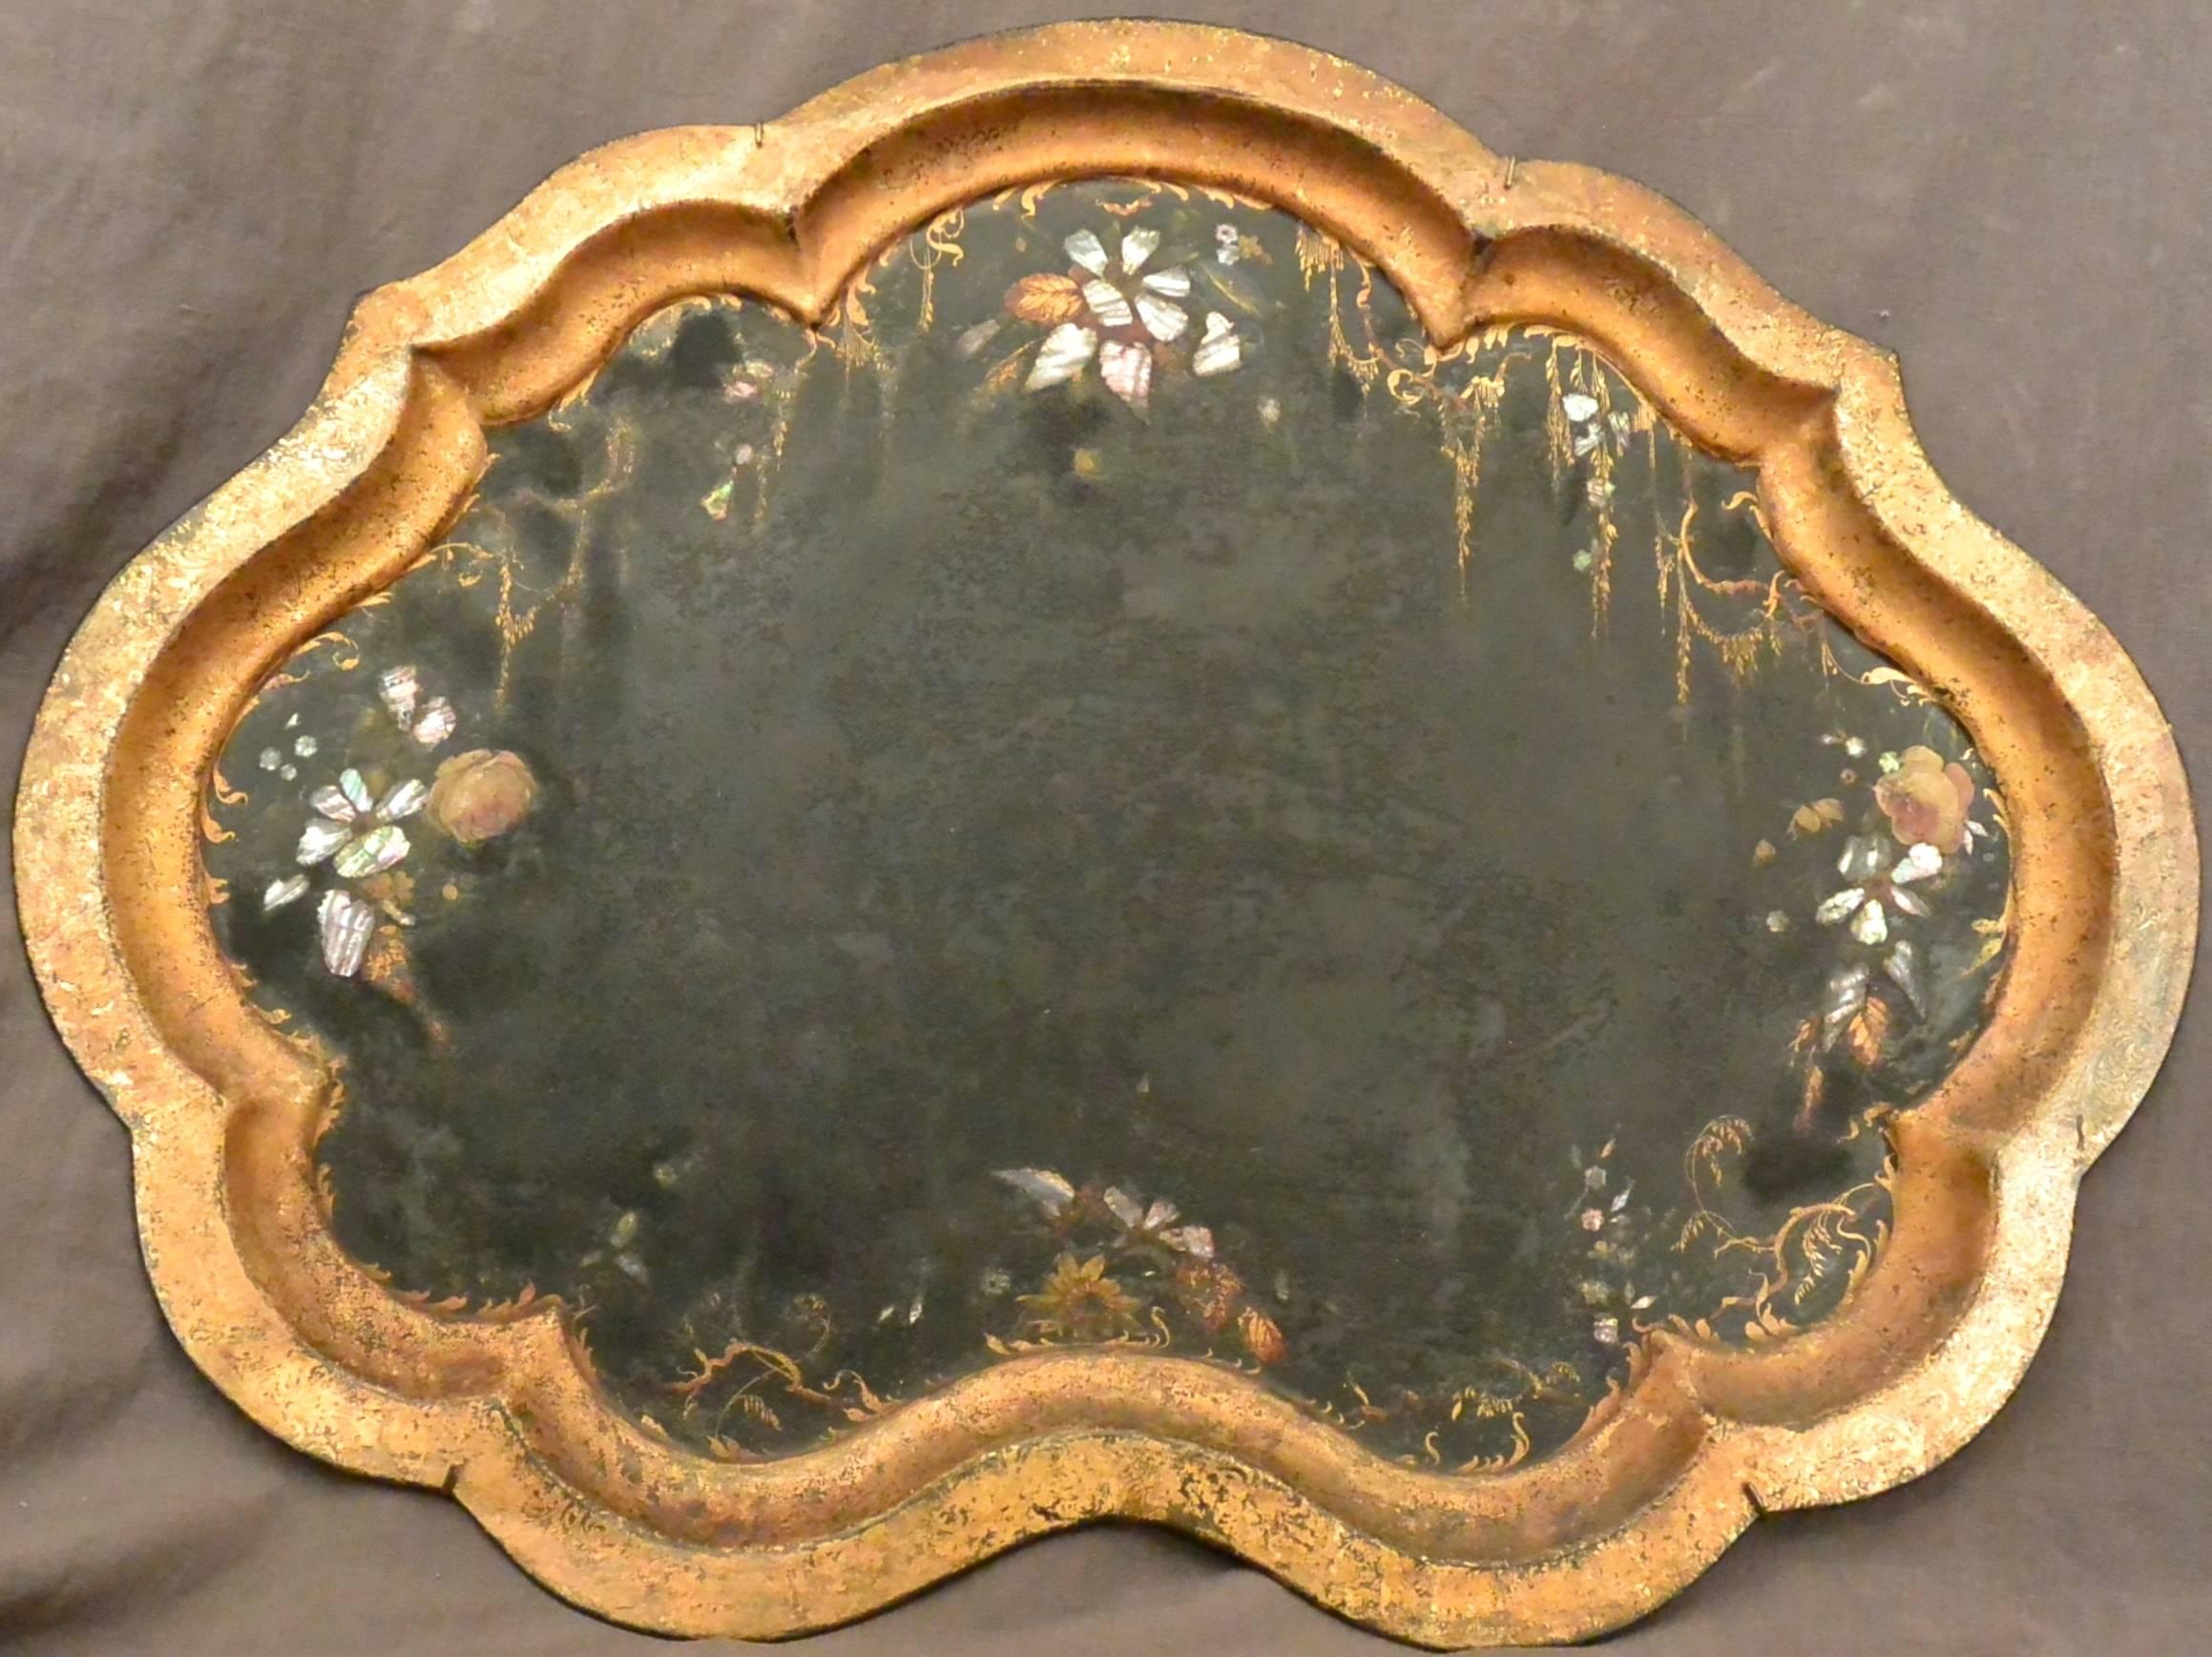 Antique gilt and black painted tole shaped tray with mother-of-pearl inlay, Italy, circa 1870s.
Dimension: 32